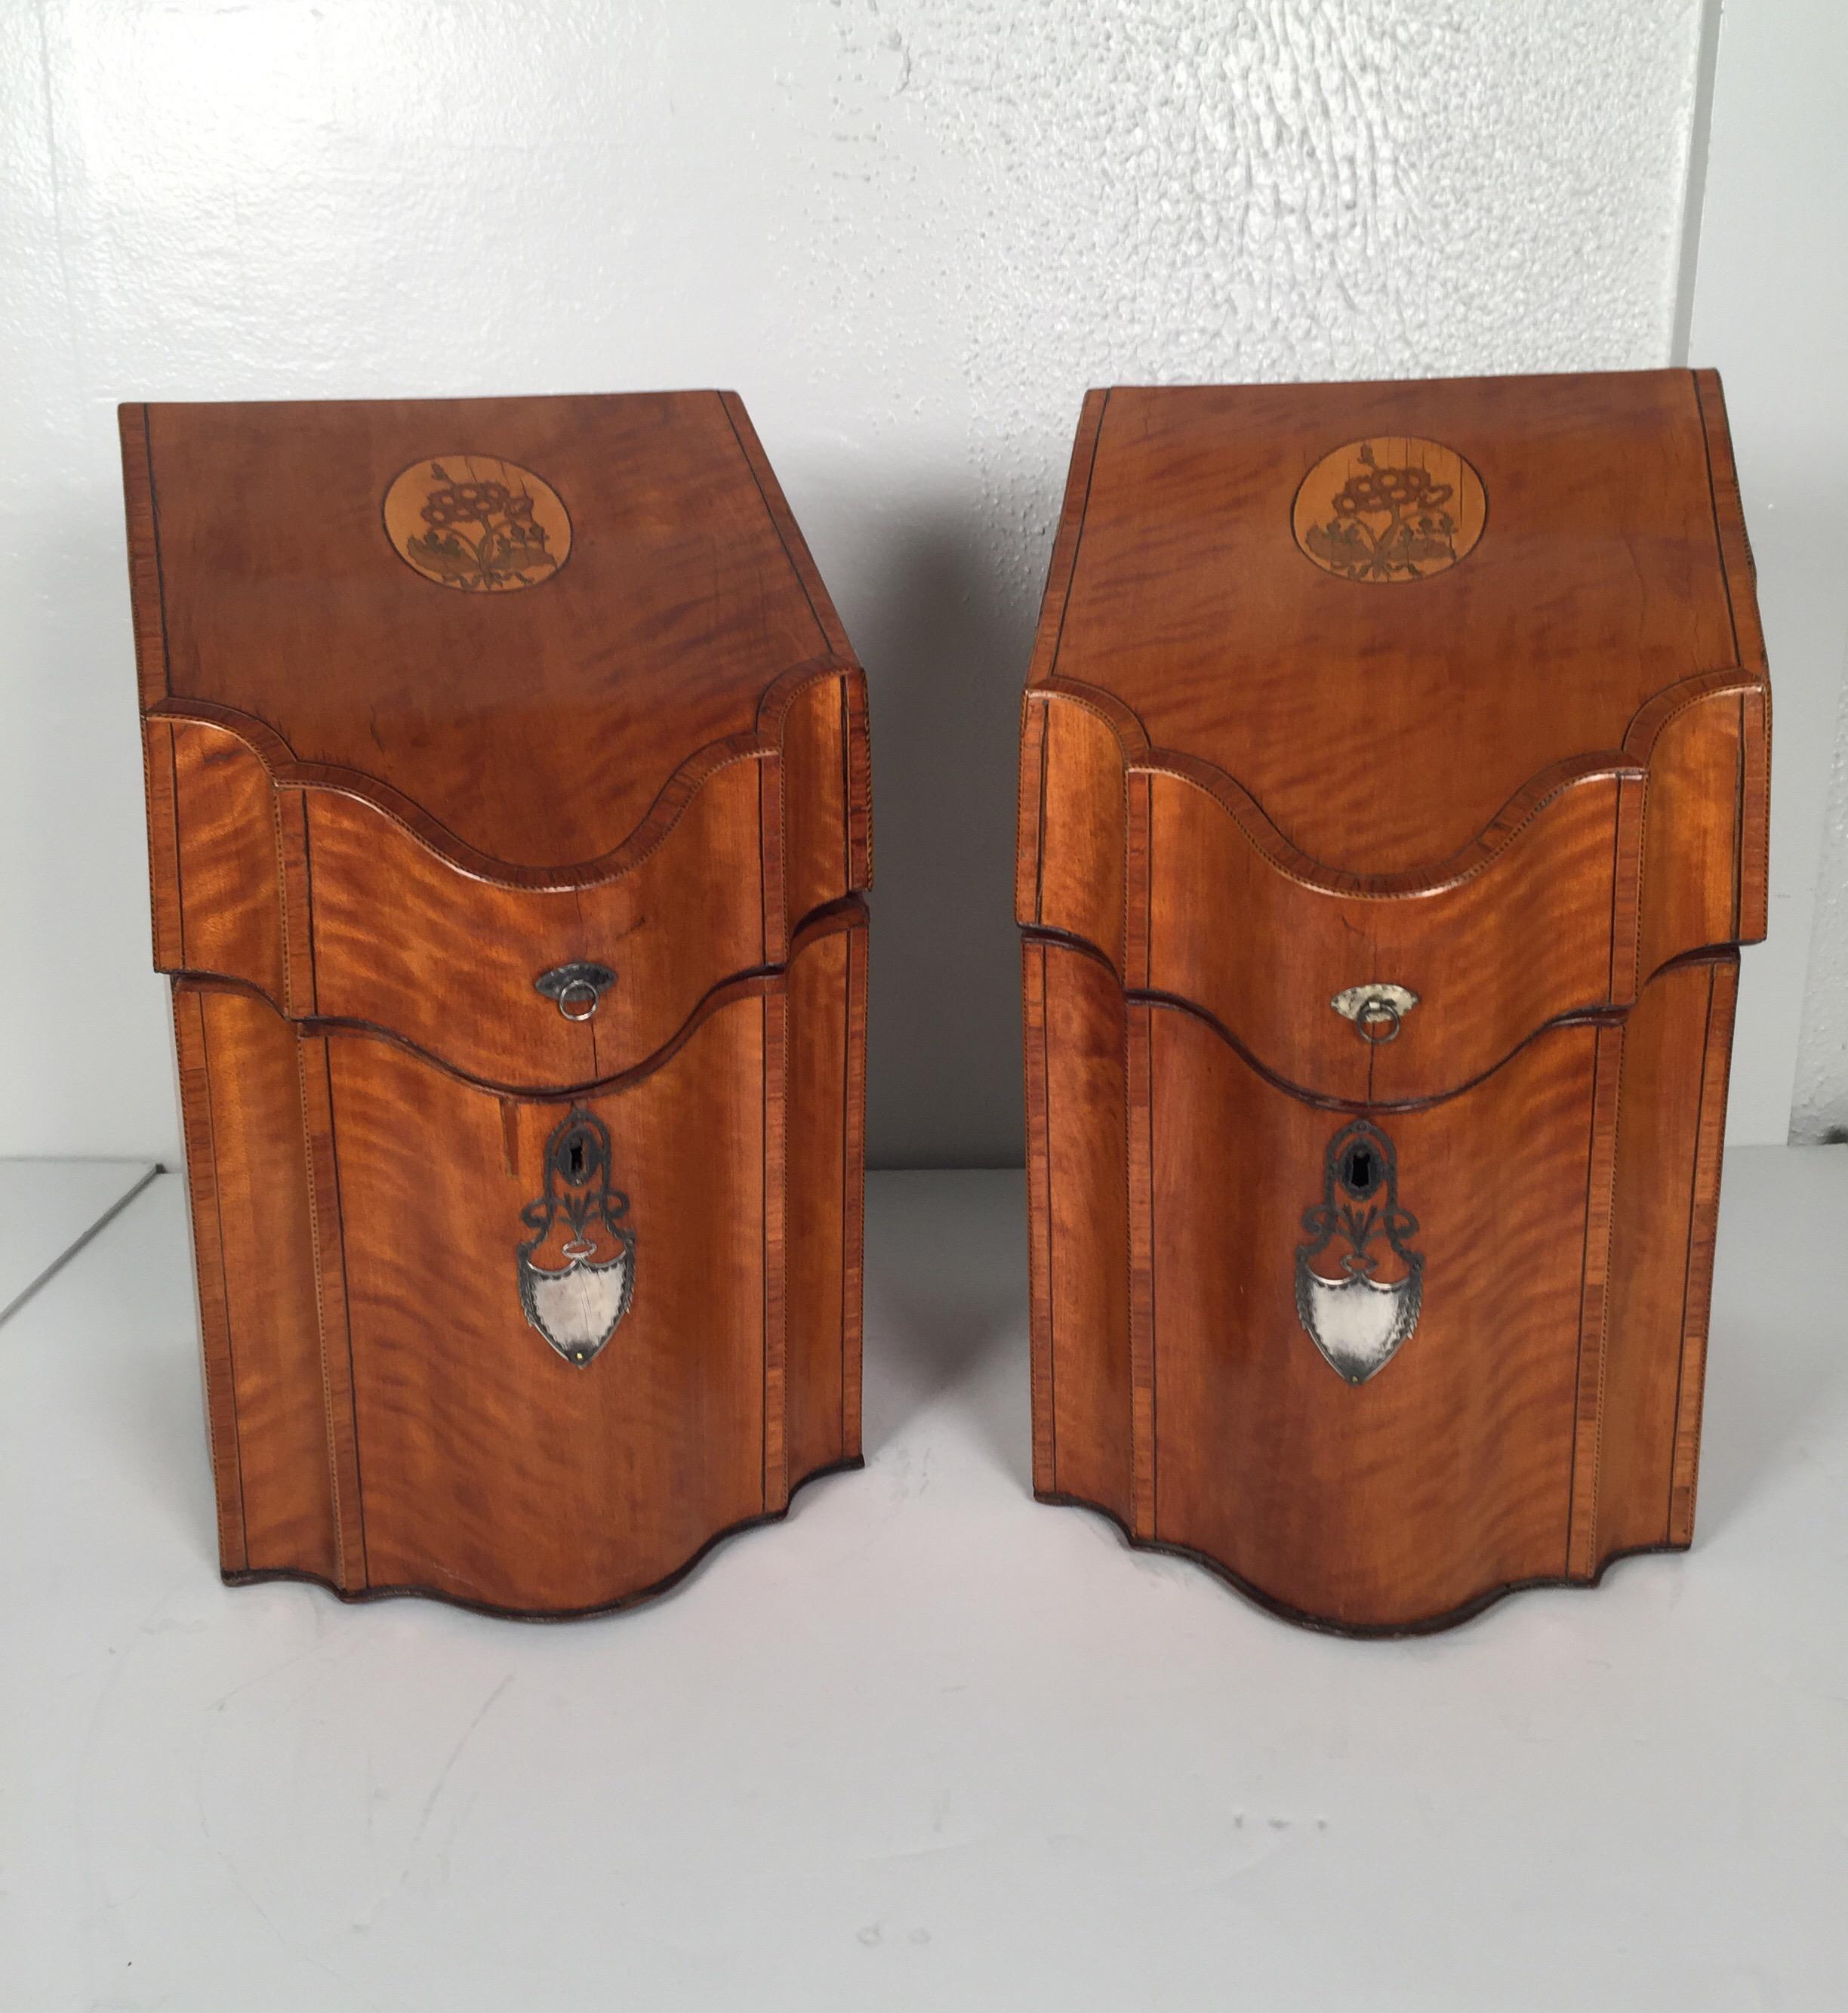 Superb Pair of English Inlaid Satinwood Cutlery Boxes 14